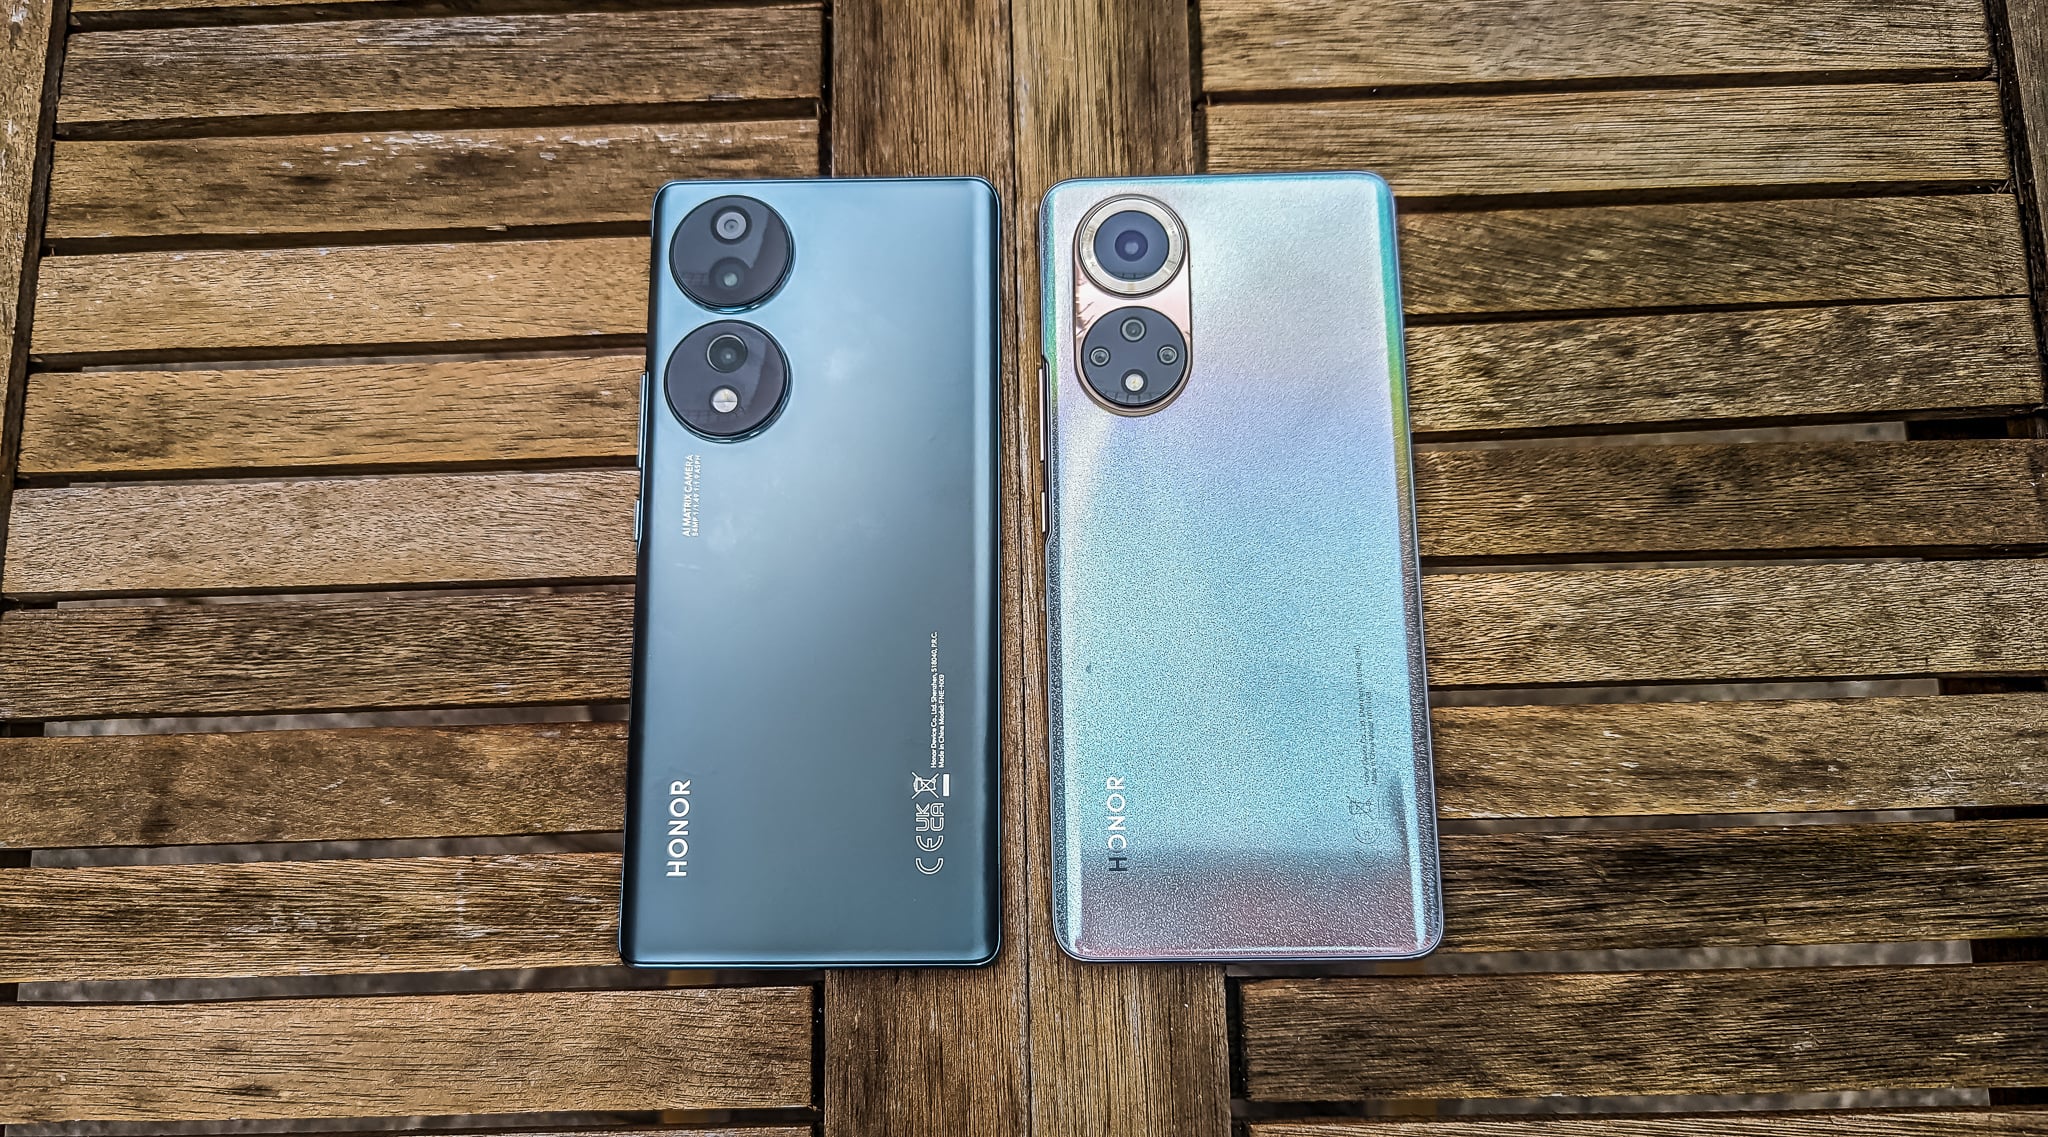 Honor 70 Review – The new 54MP Sony IMX800 camera helps this stand out in the mid-range